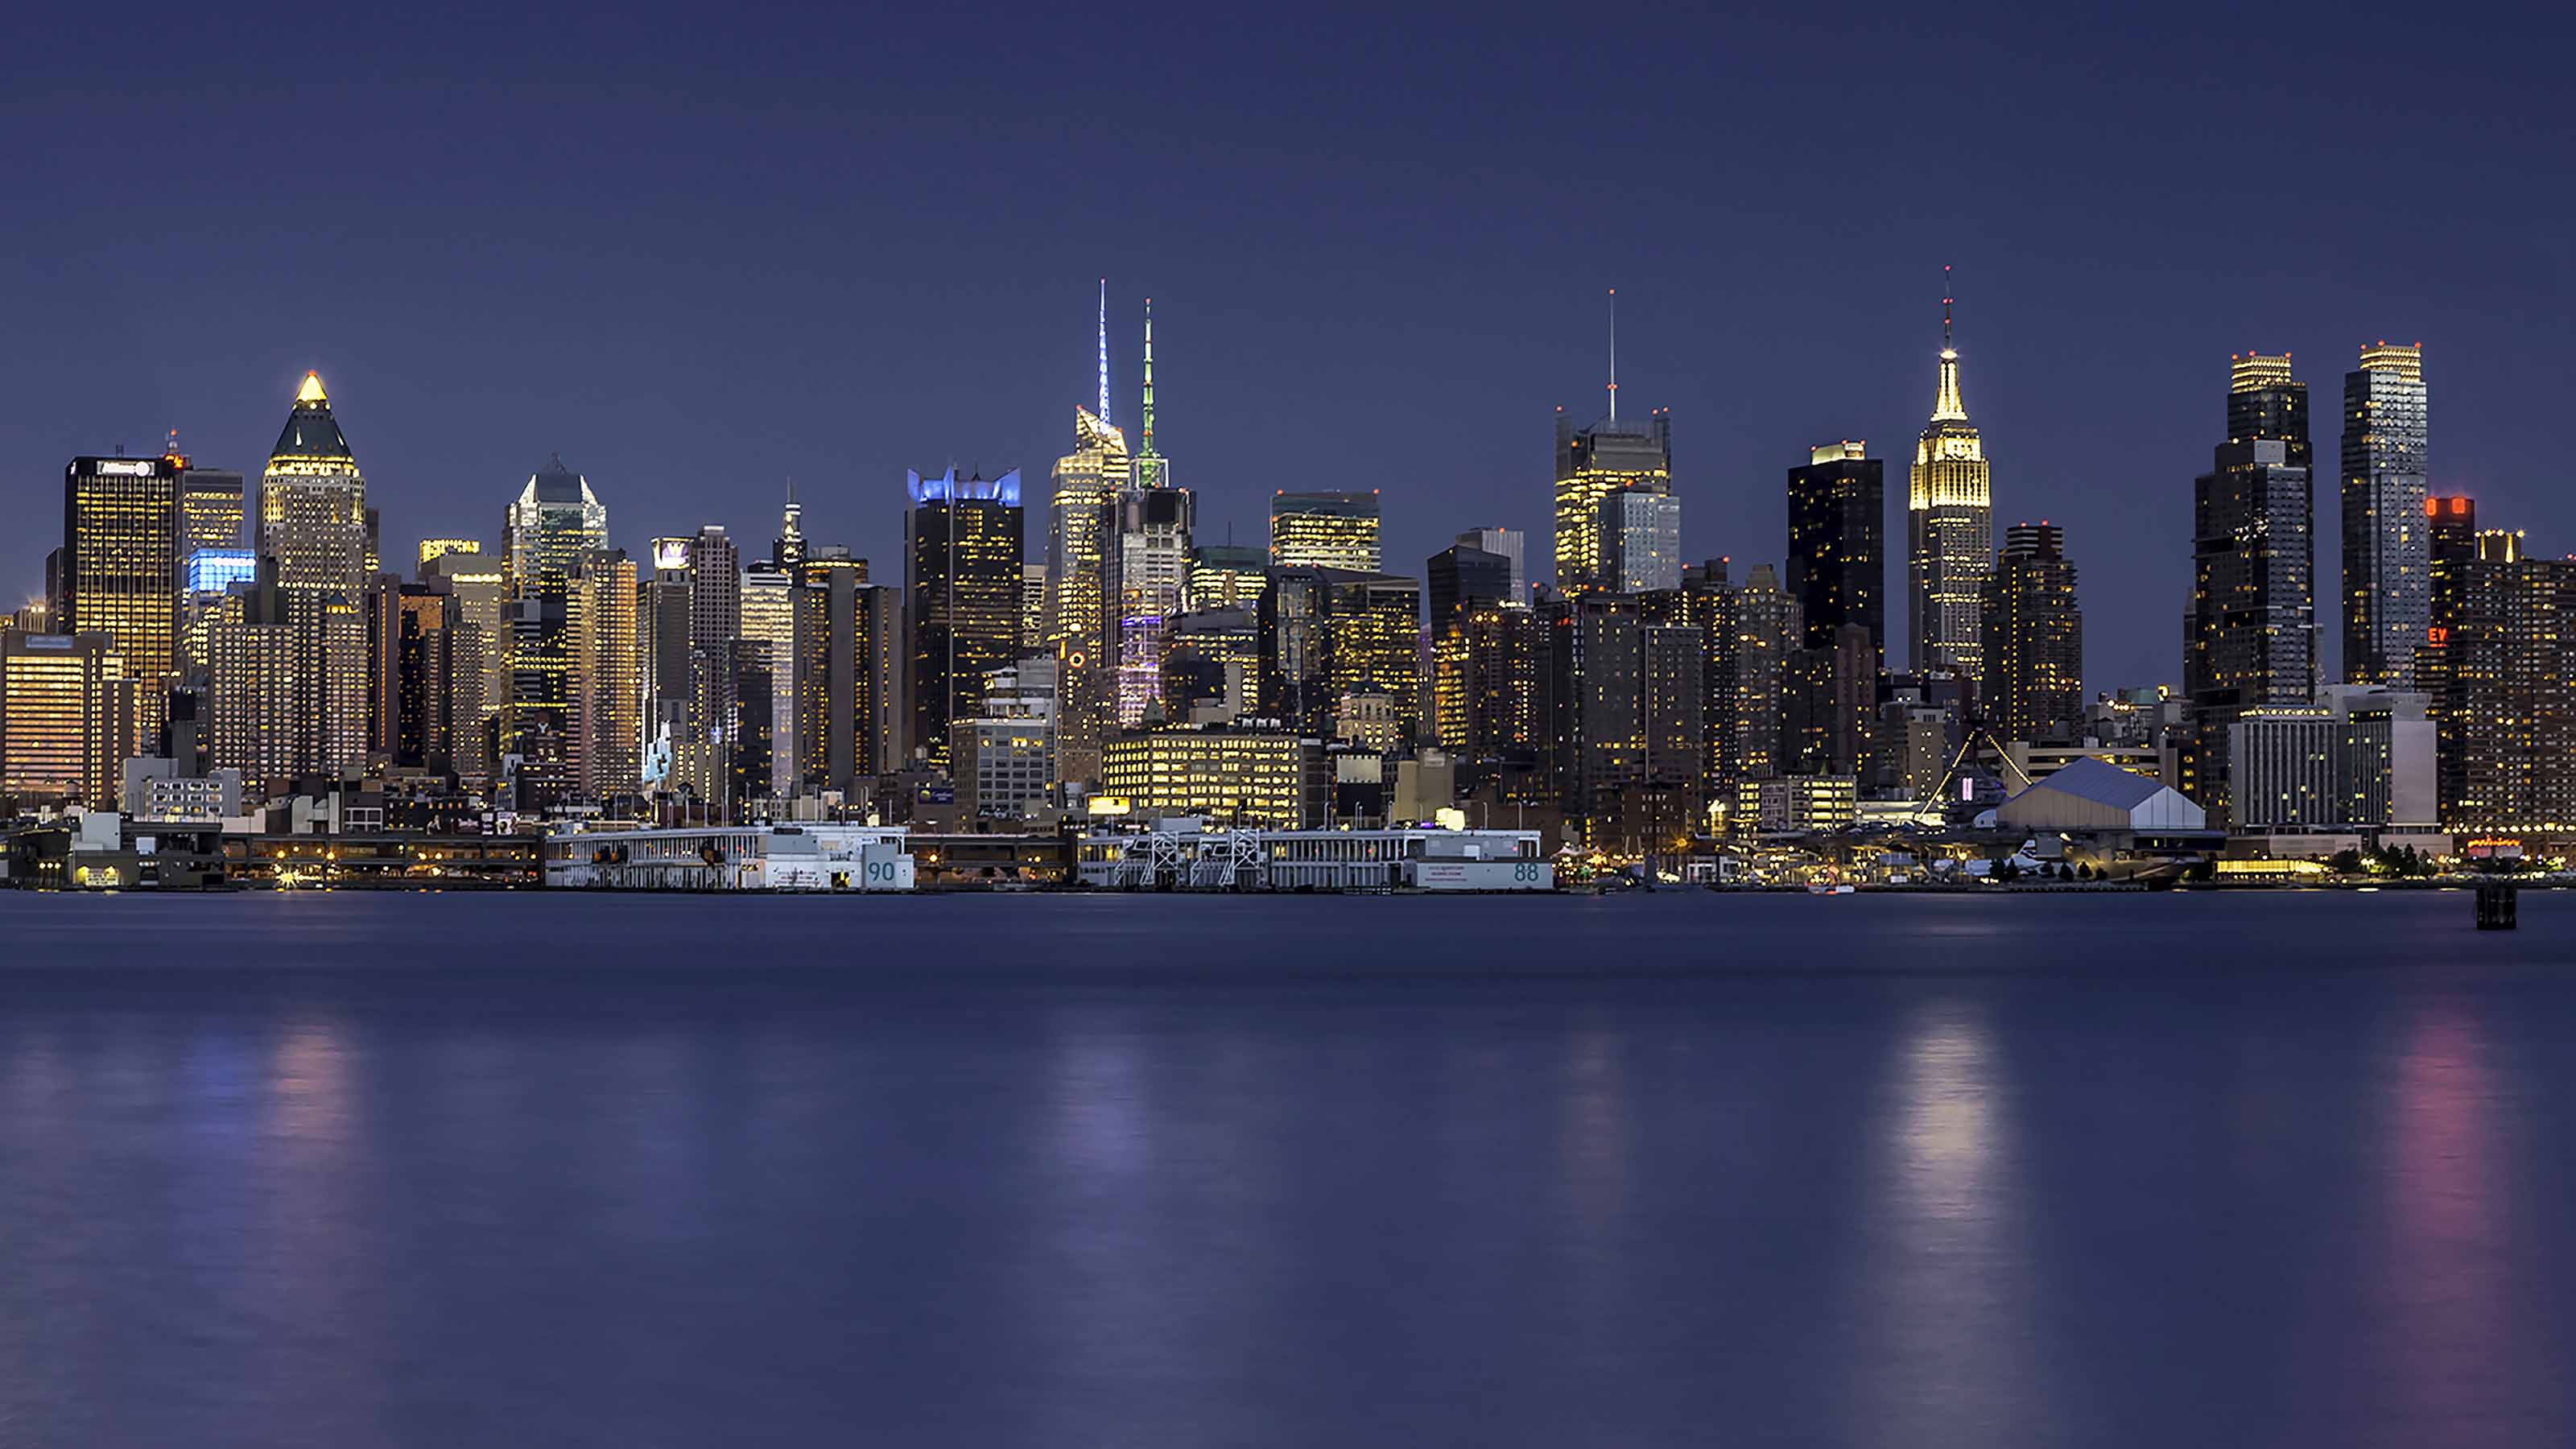 The 10 most expensive cities in the U.S.